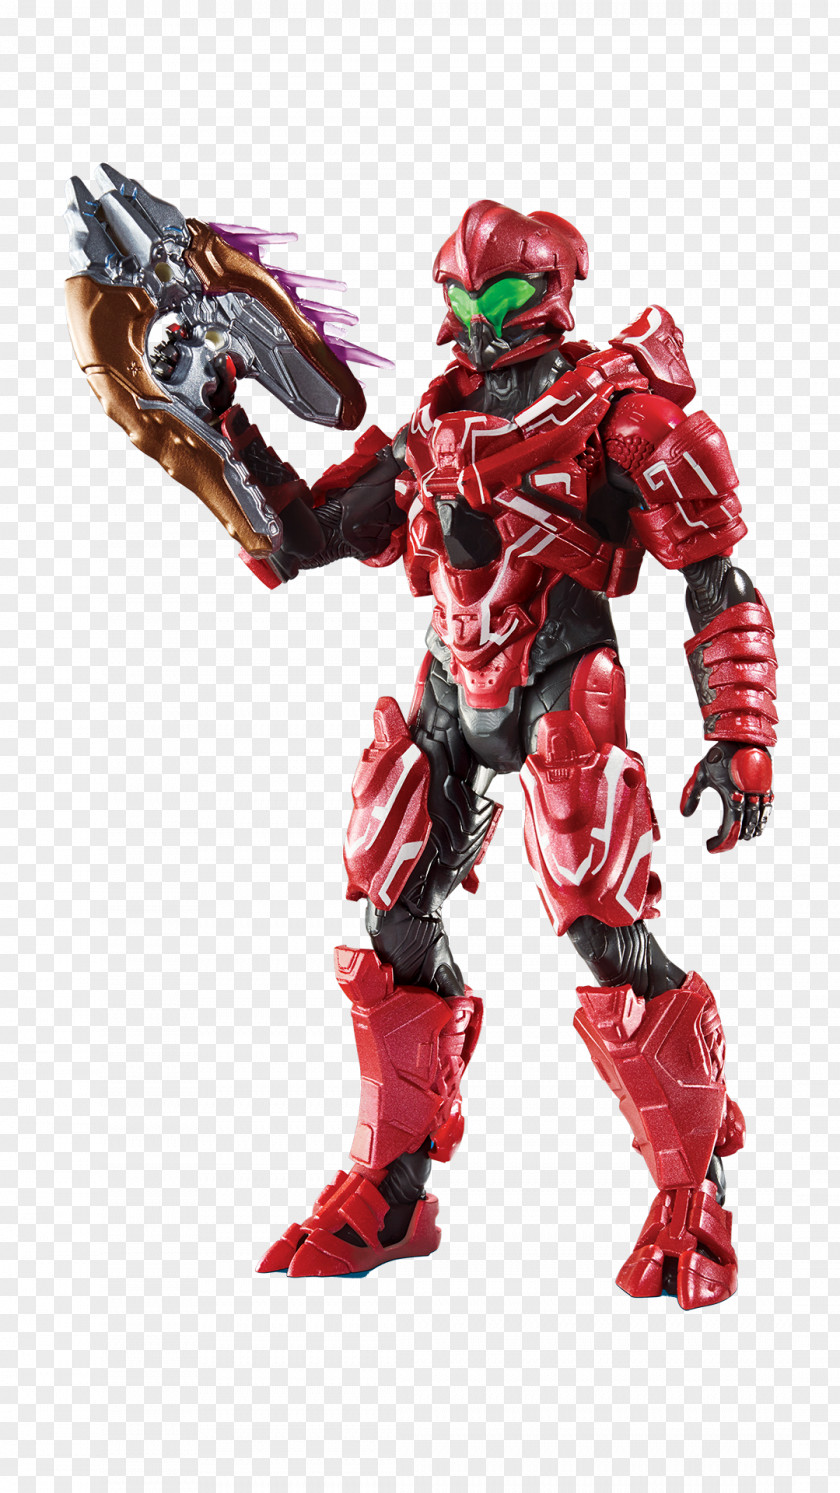 Photosensitive Halo: Spartan Assault Halo 5: Guardians Master Chief 3: ODST PNG